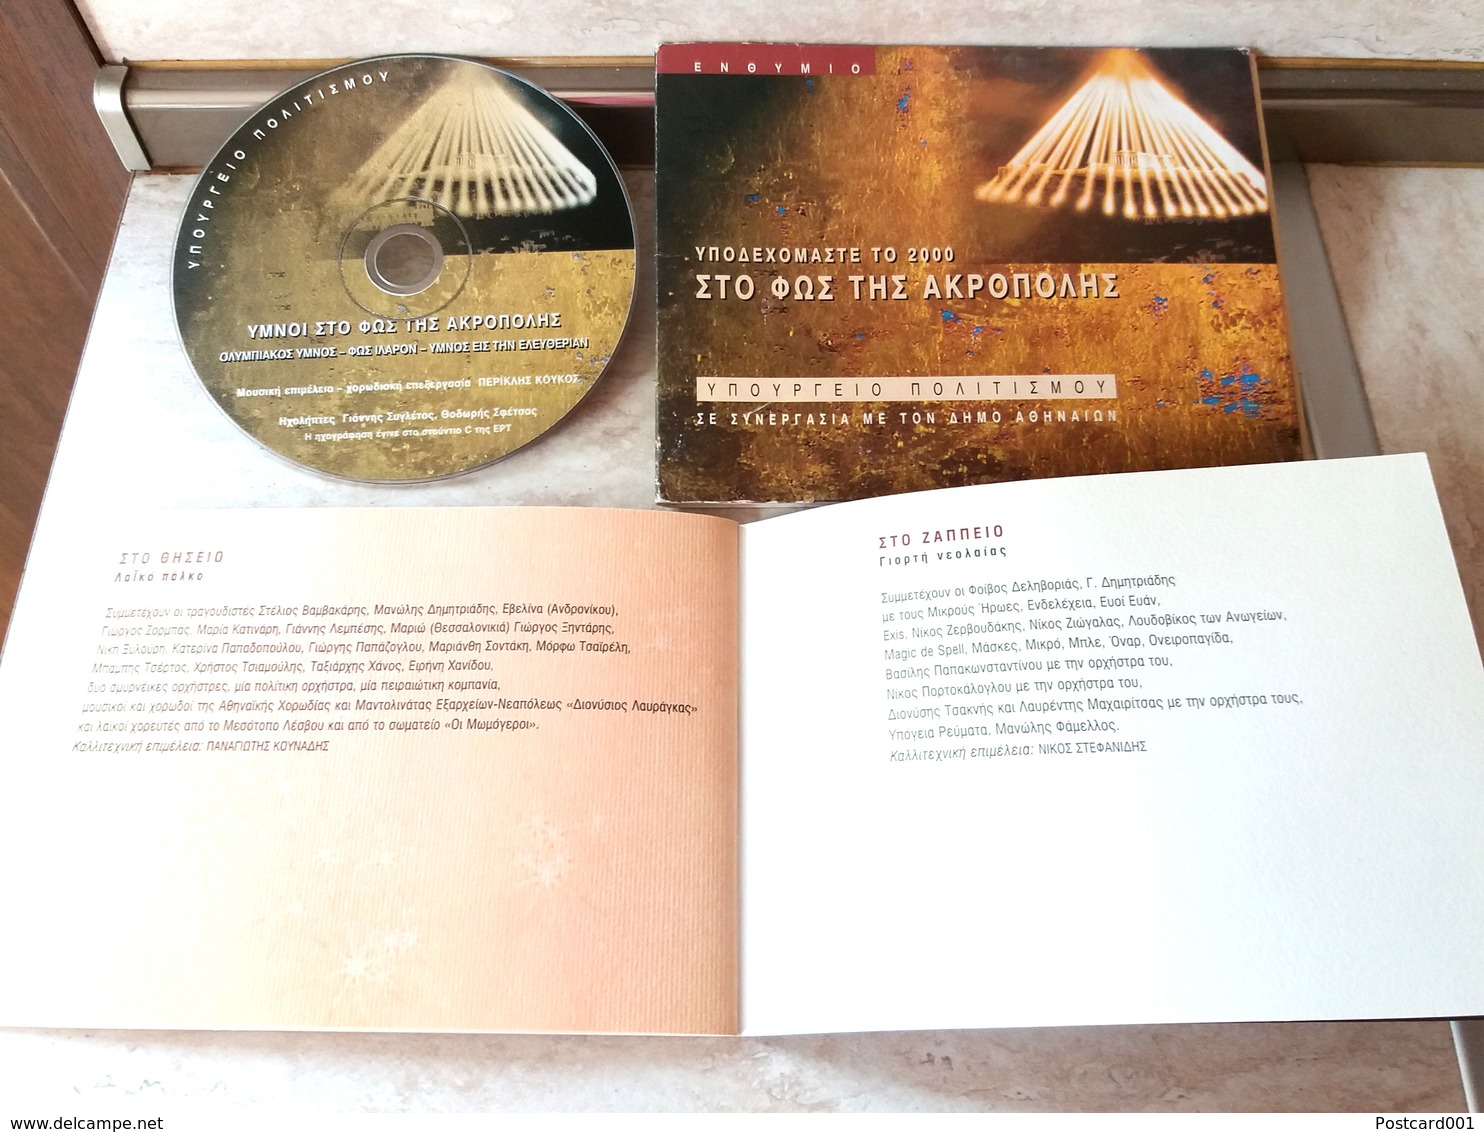 ACROPOLE IN LIGHT AND MUSIC - DVD AND BOOK WITH TEXTS OF GREEK SONGS (2) - Musik-DVD's